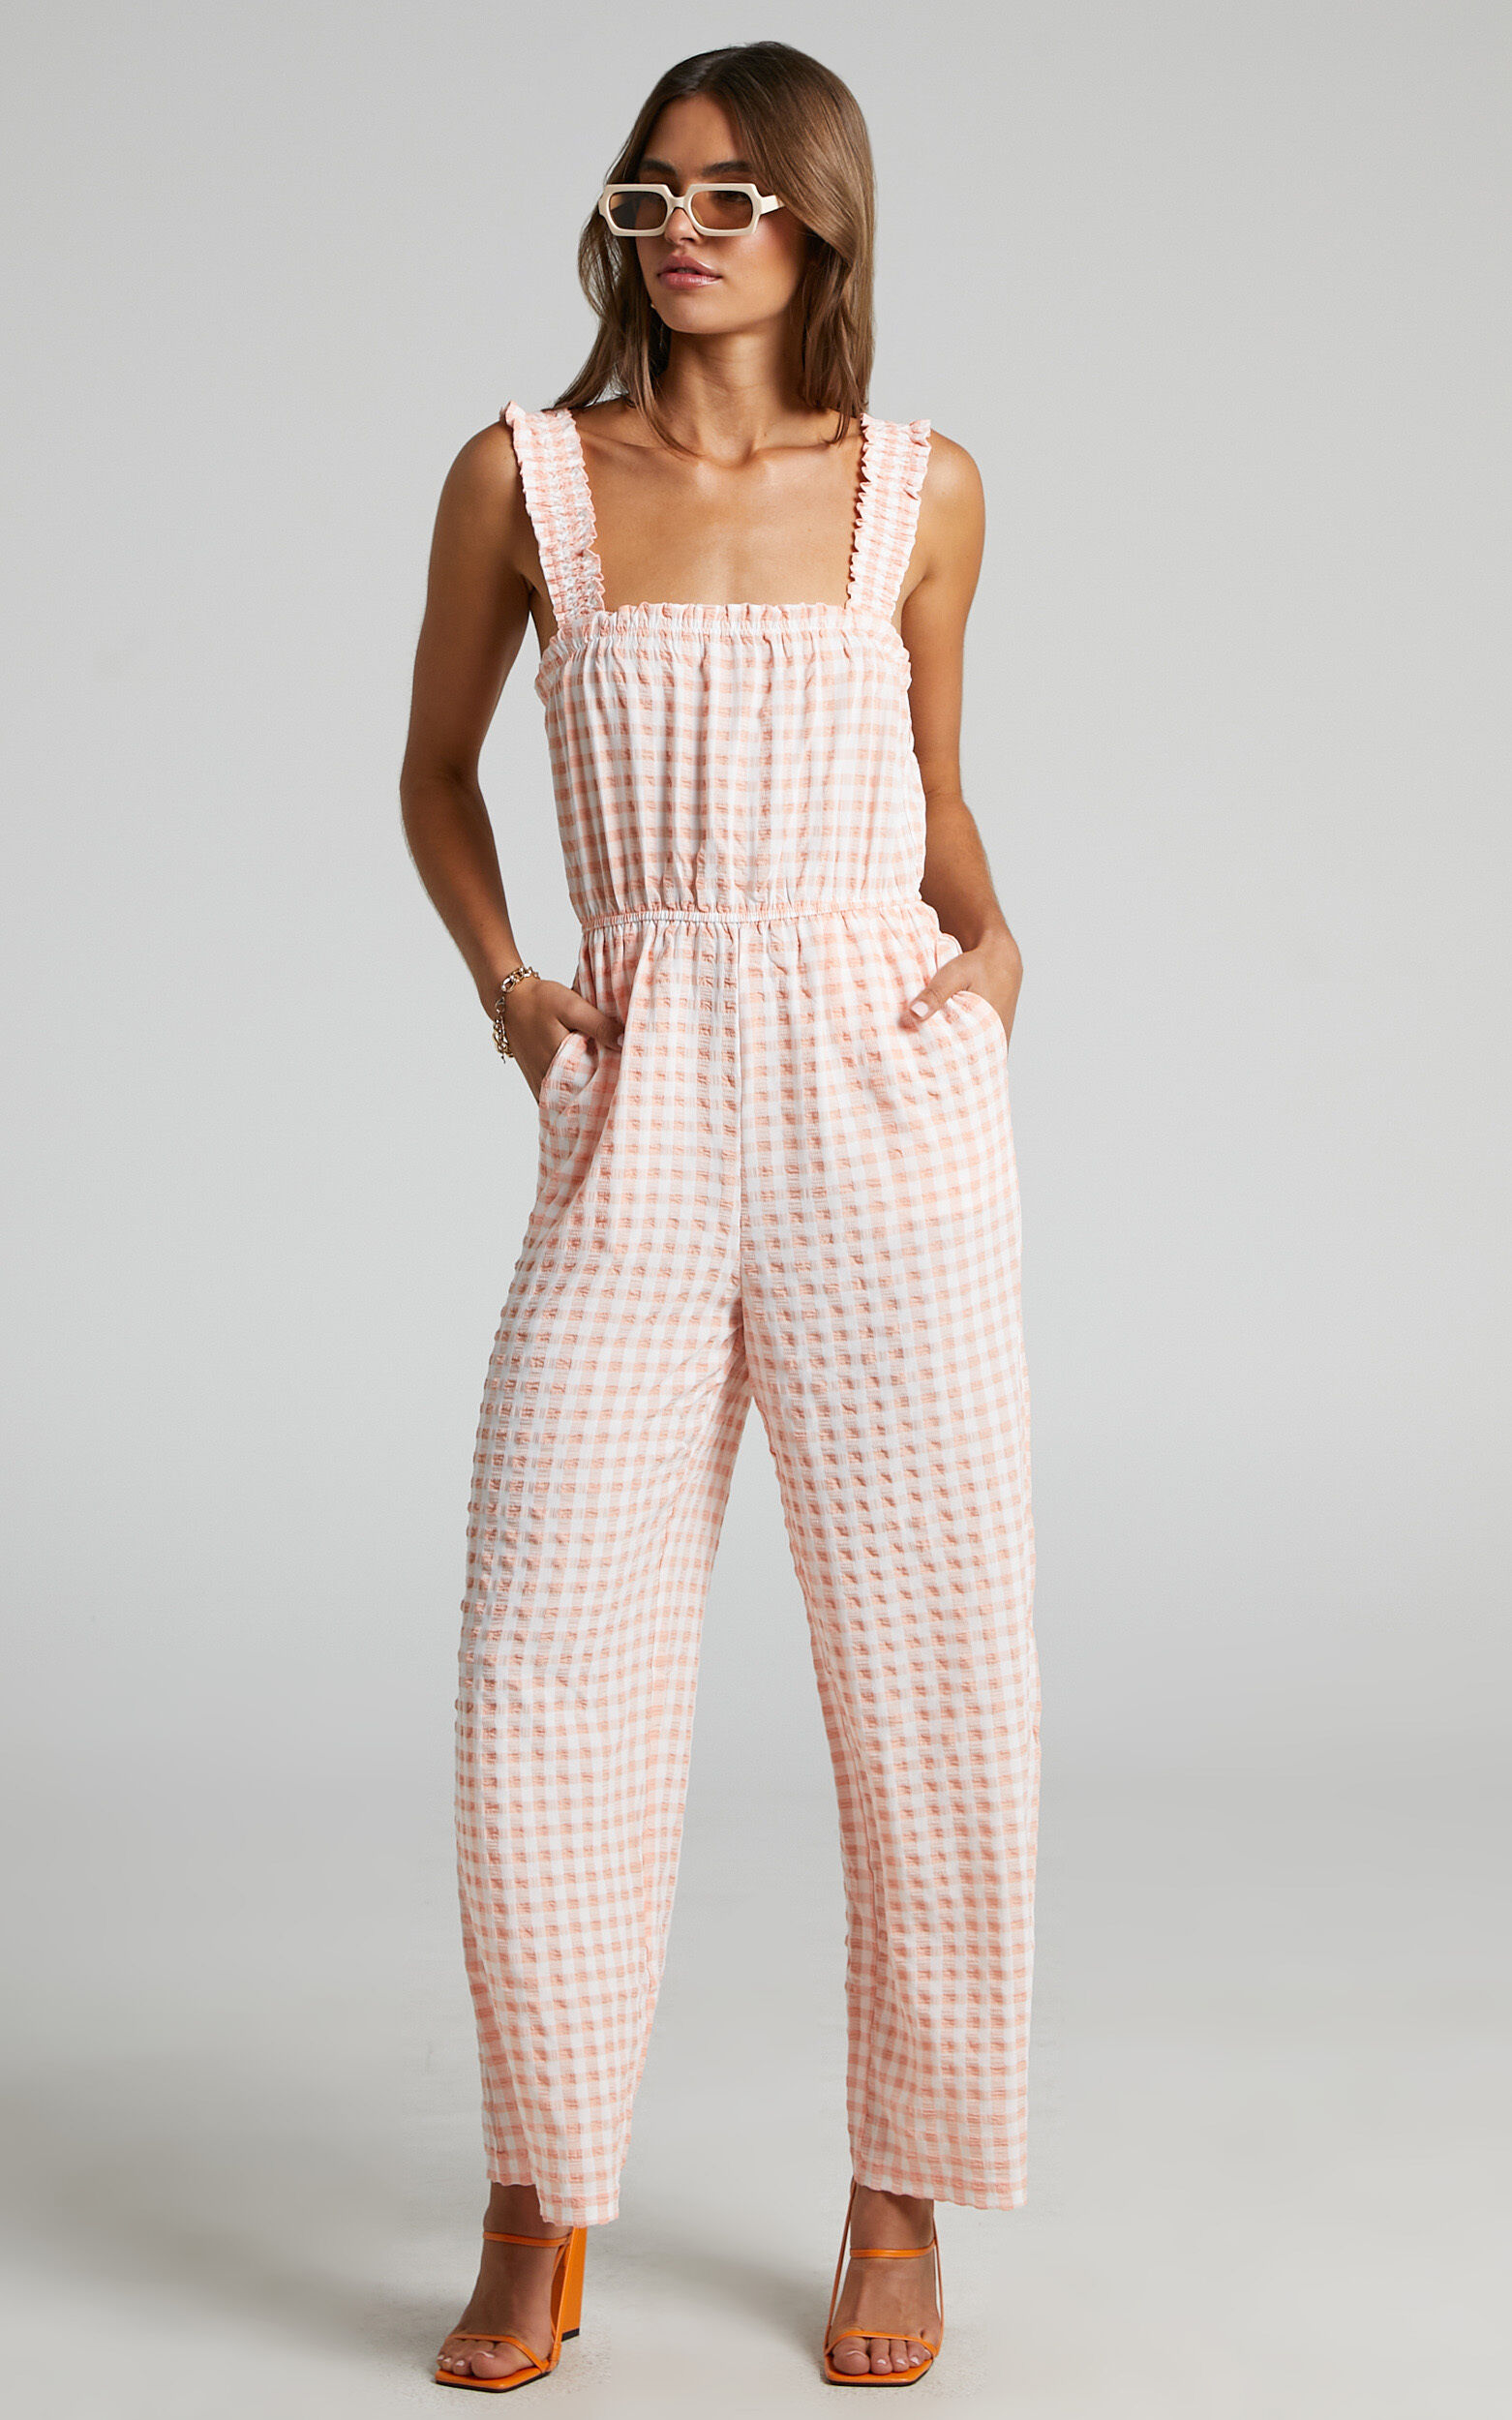 Zilliah Elastic Frill Strap Jumpsuit in Peach Gingham - 06, ORG1, super-hi-res image number null